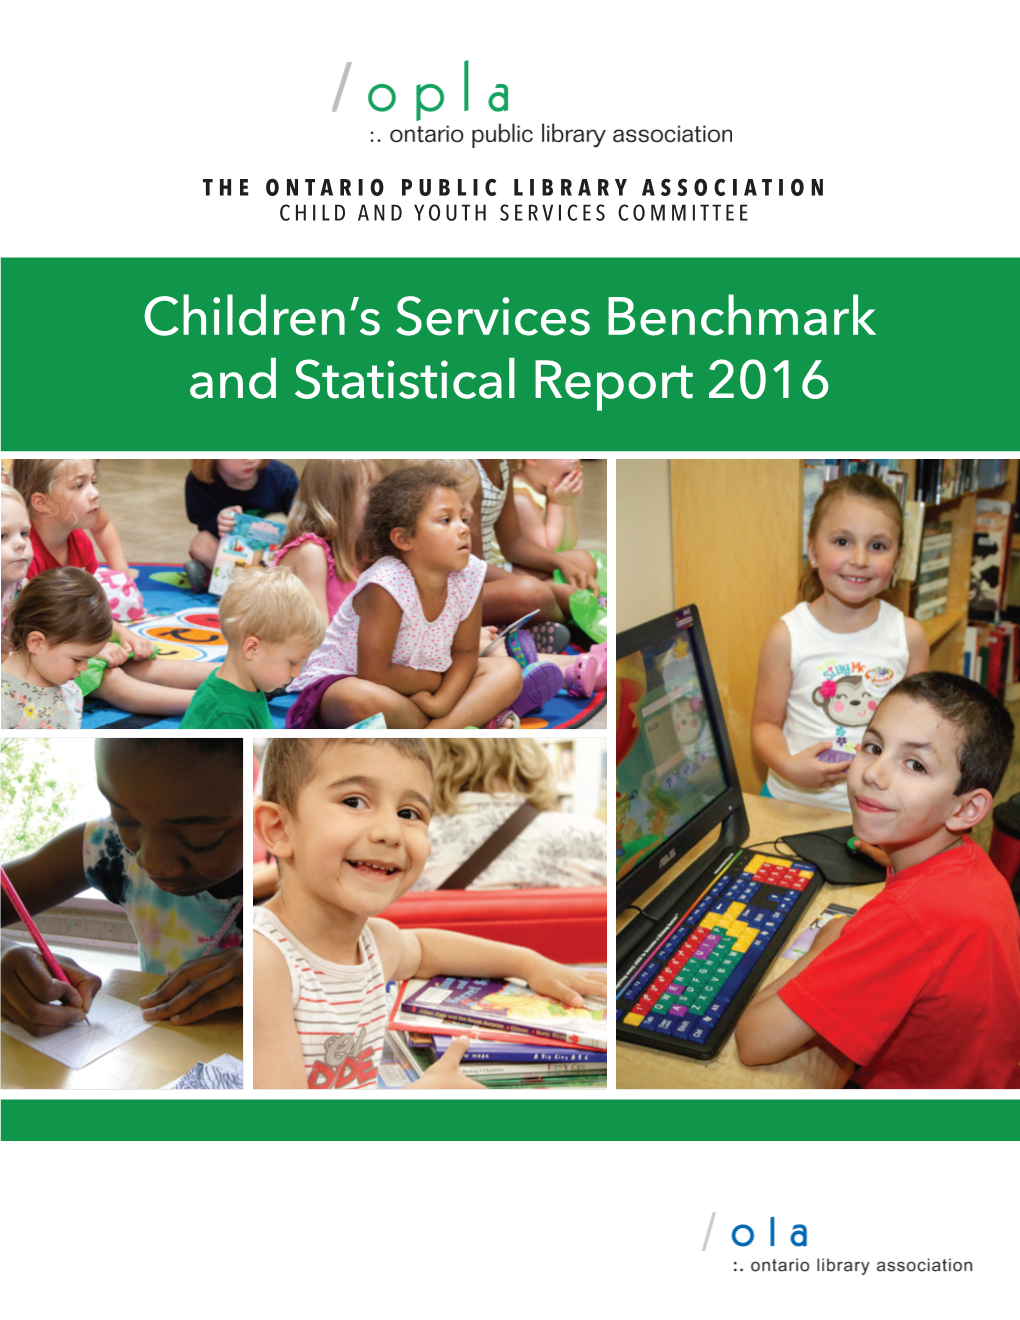 Children's Services Benchmark and Statistical Report 2016